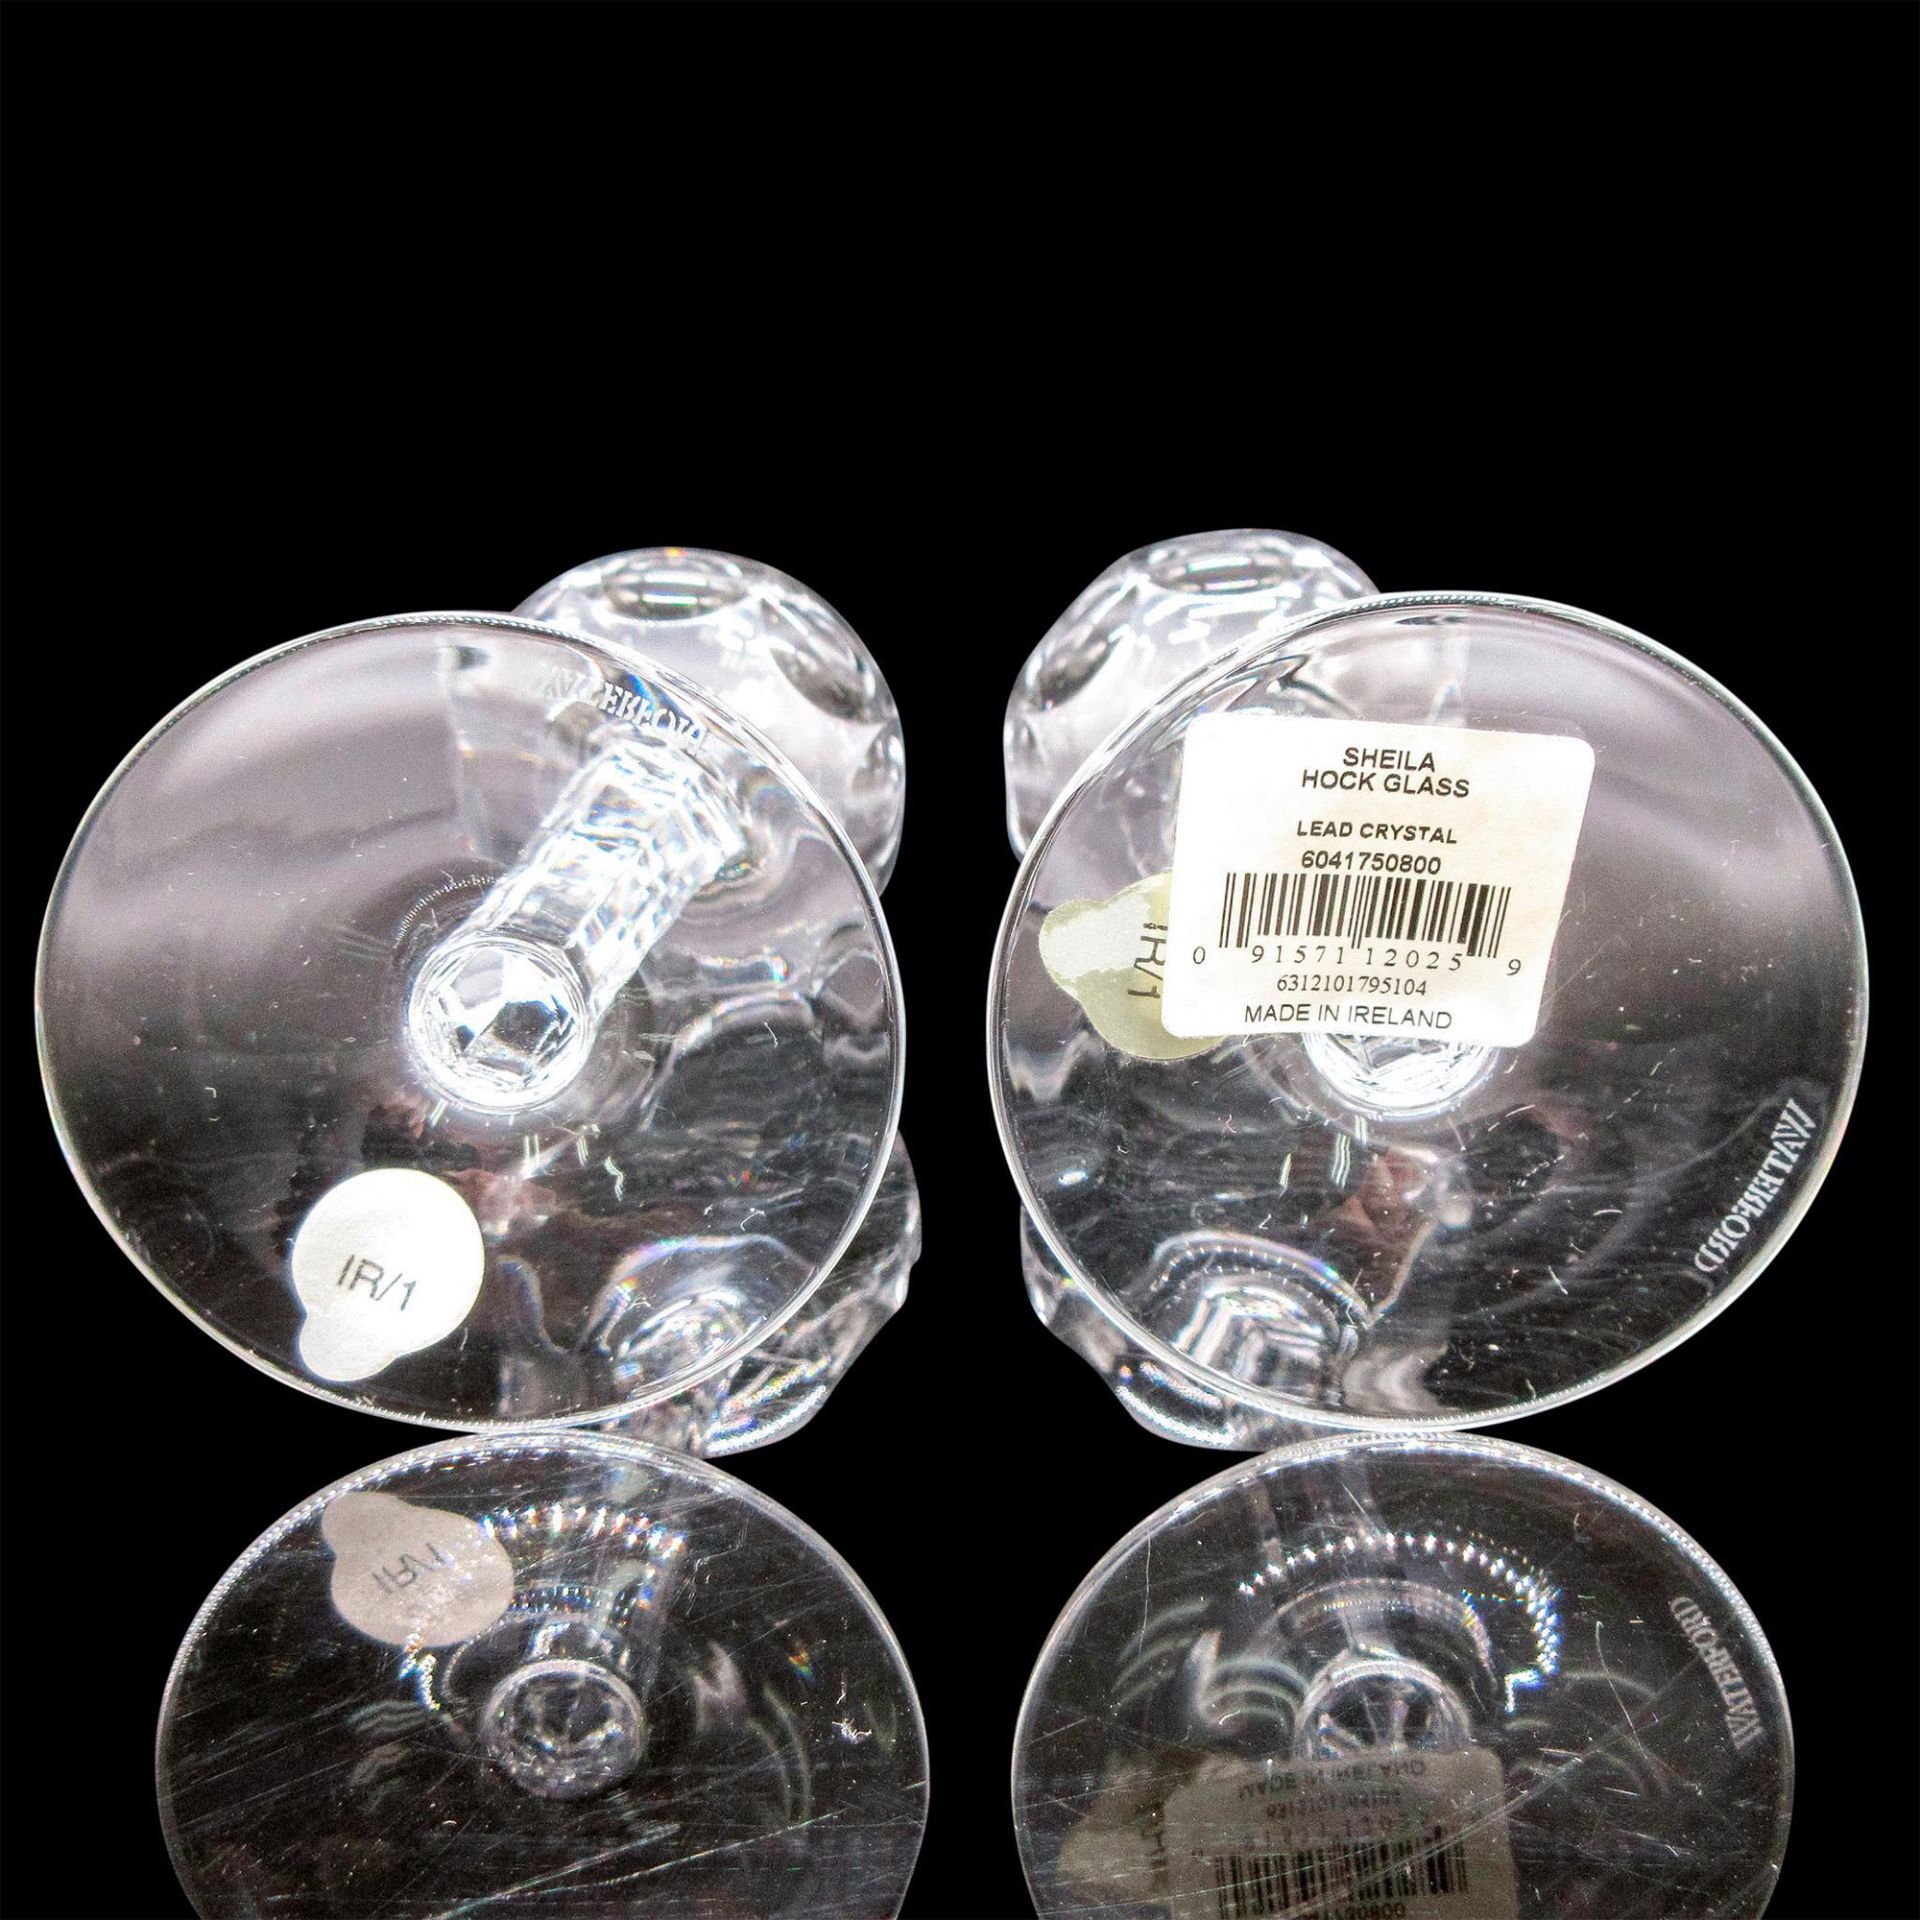 2pc Waterford Crystal Hock Wine Glasses, Sheila - Image 4 of 9